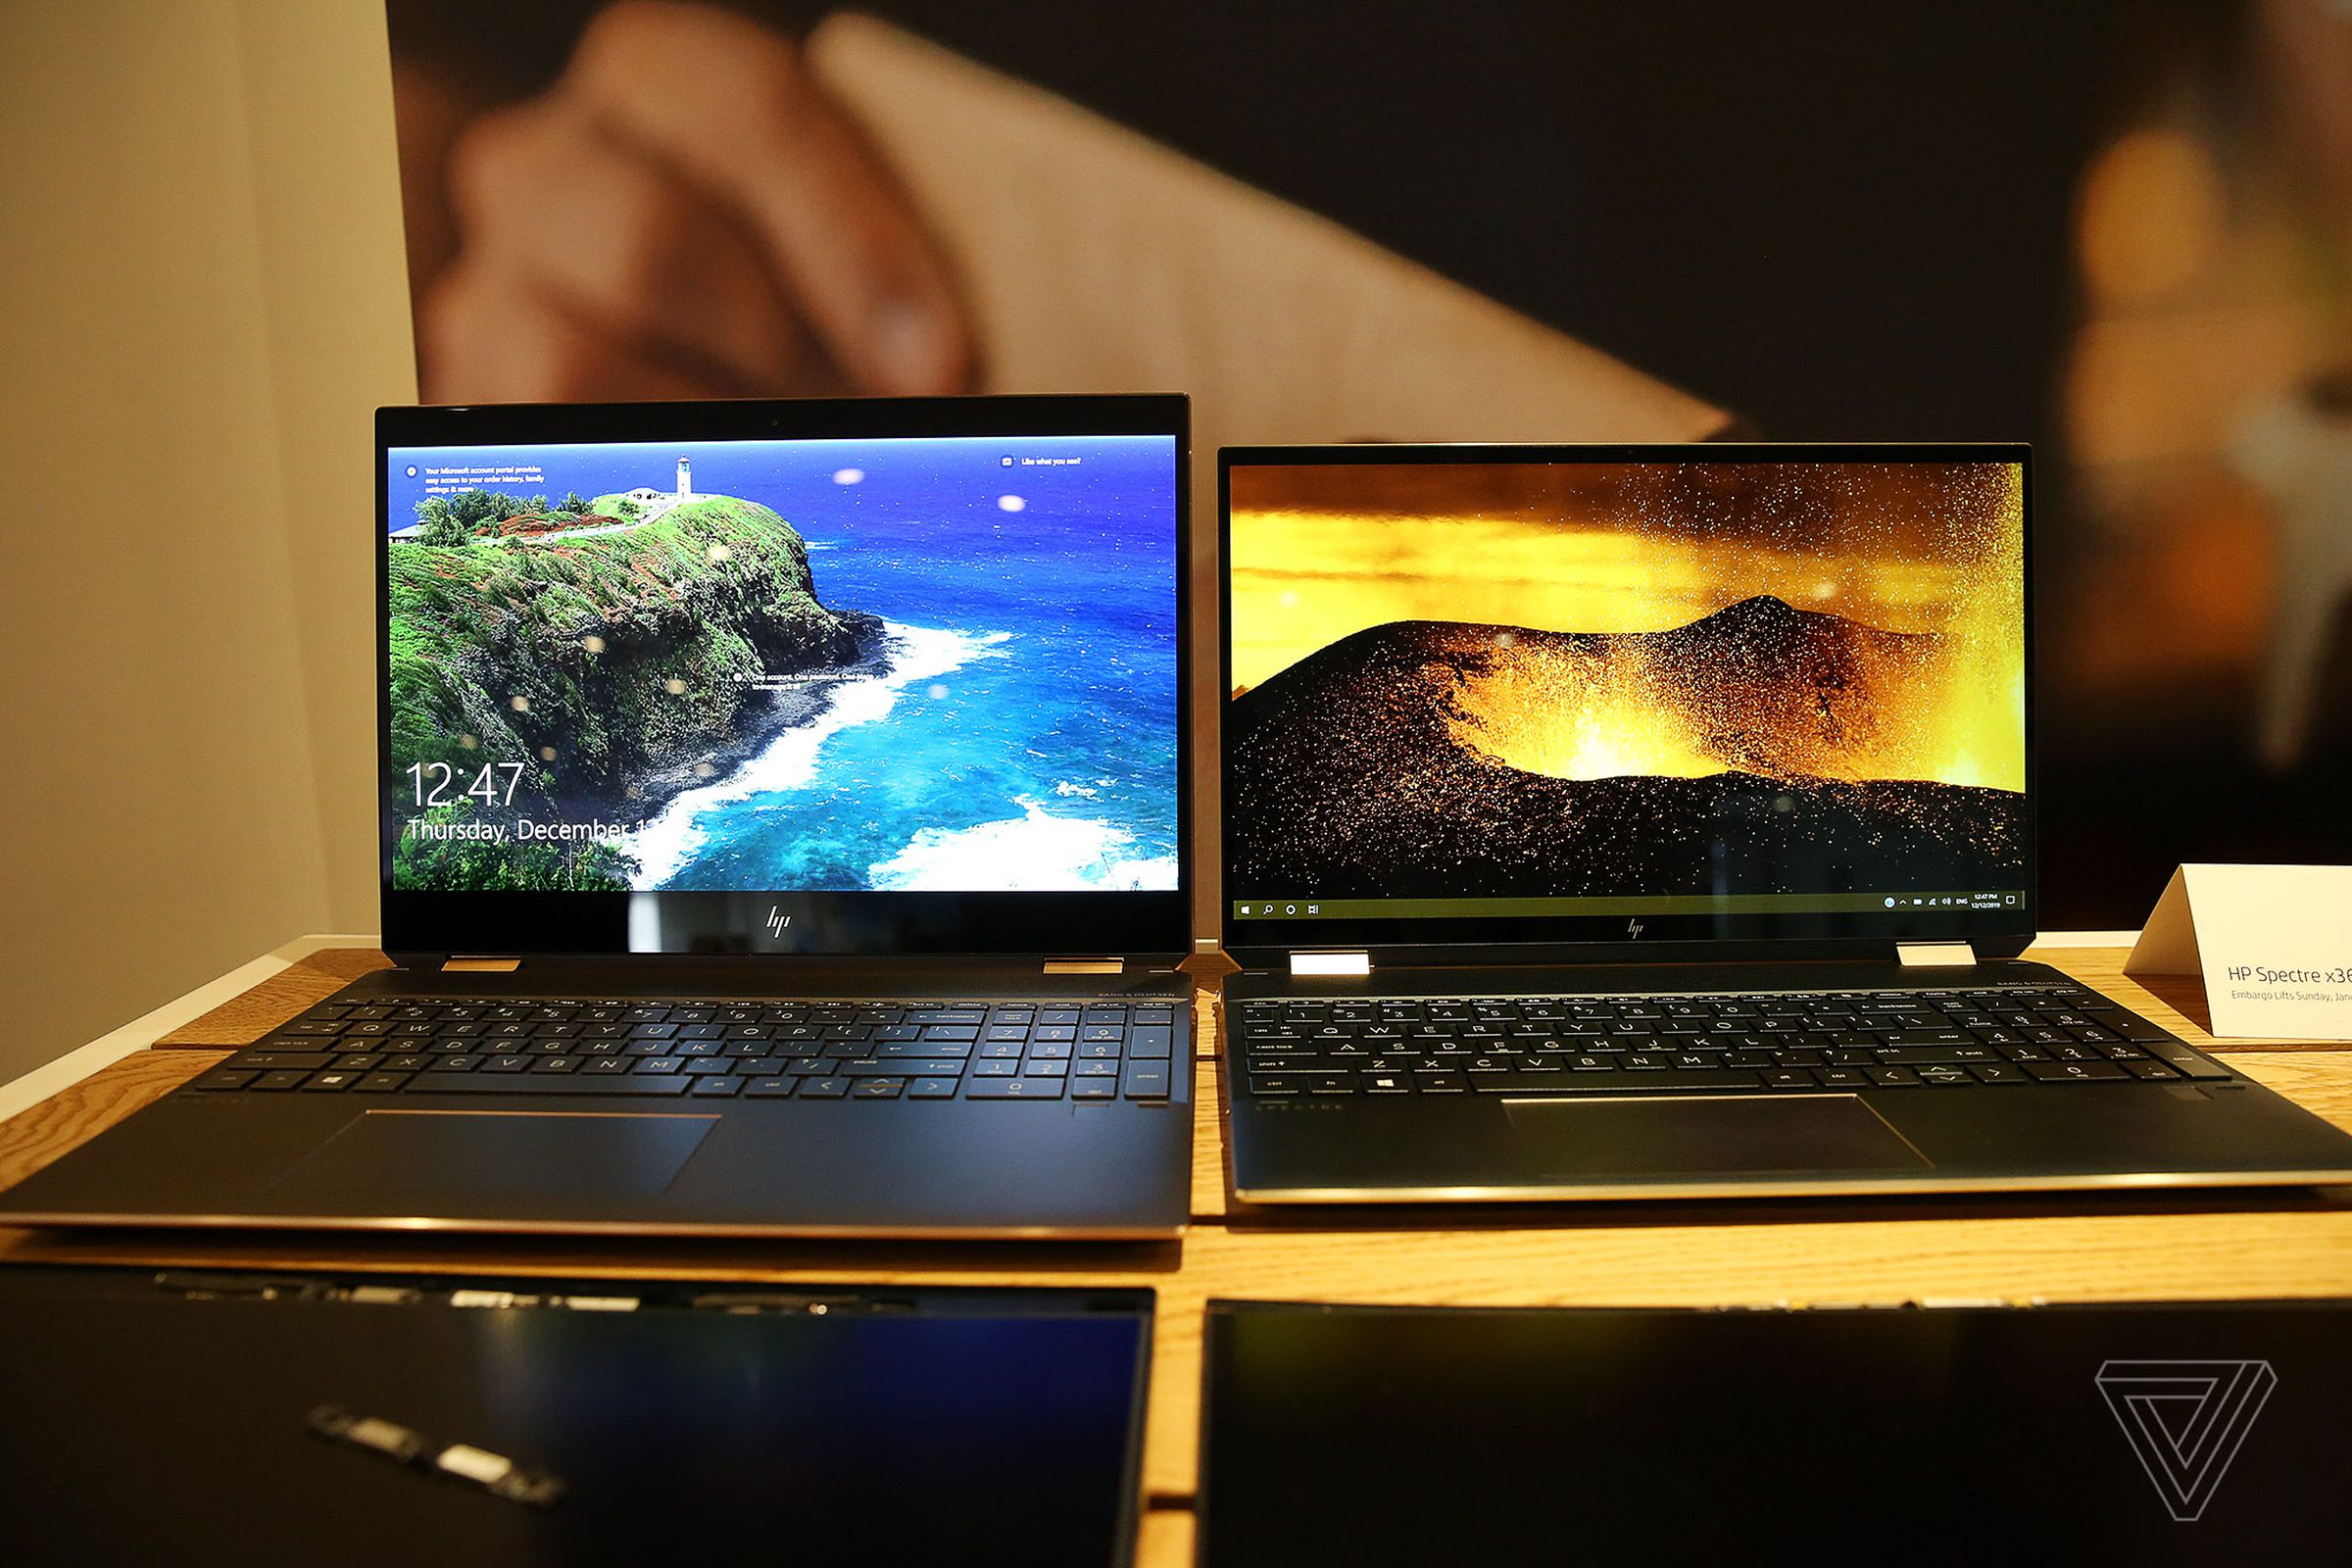 The old Spectre x360 15 (left) compared to the new model (right).